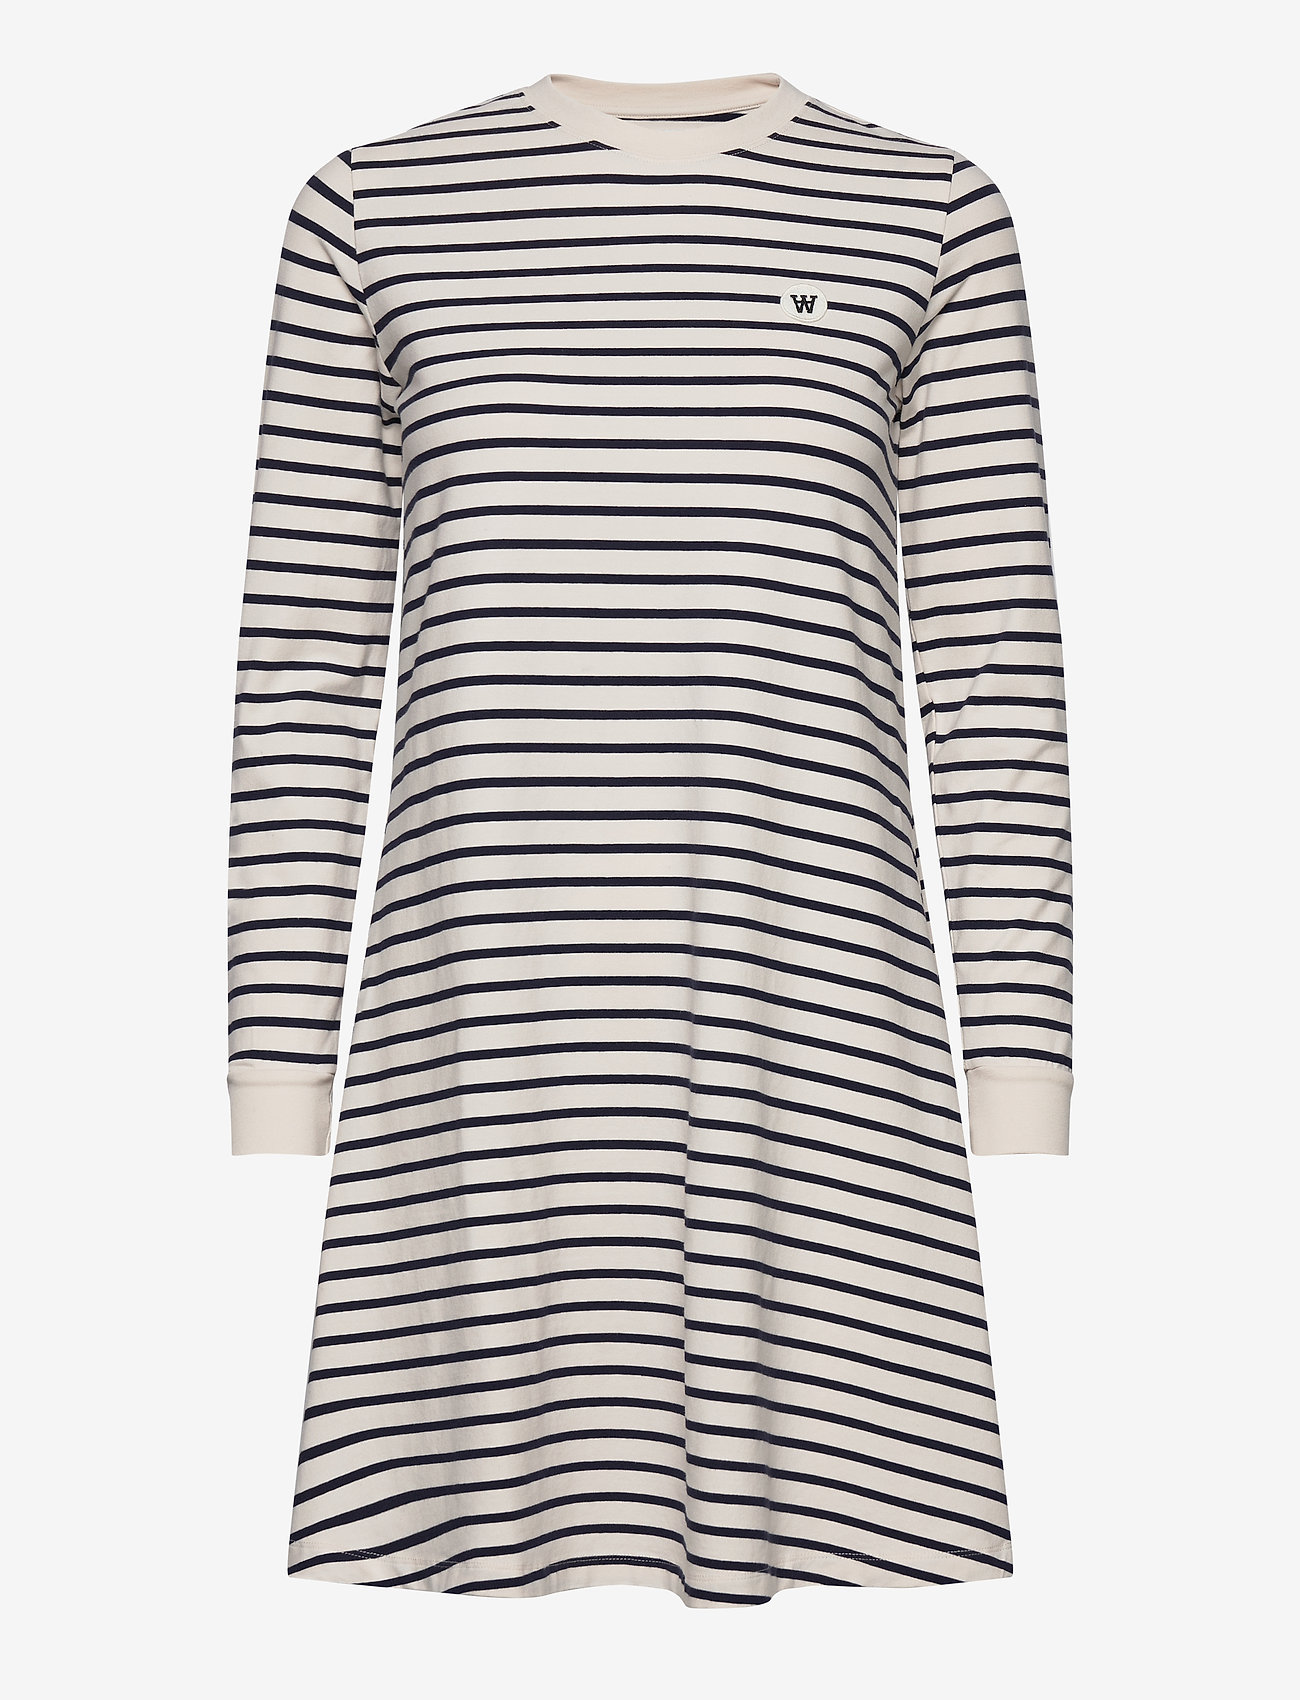 Double A by Wood Wood - Isa dress - sweatshirt-kleider - off-white/navy stripes - 0